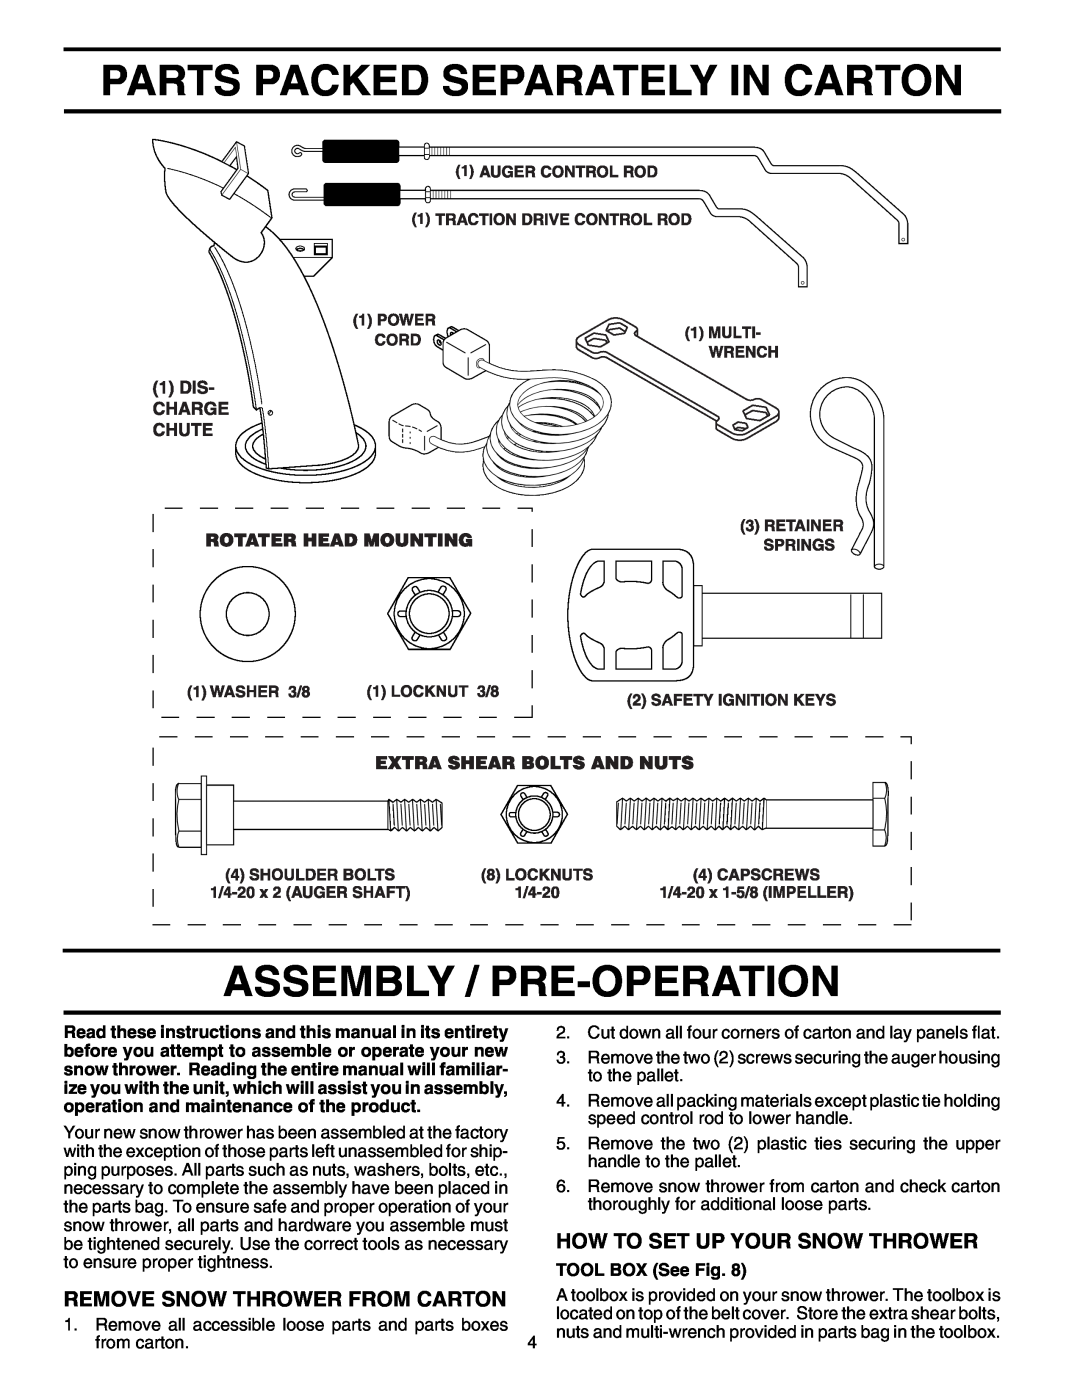 Poulan PO5524 owner manual Parts Packed Separately In Carton, Assembly / Pre-Operation, How To Set Up Your Snow Thrower 